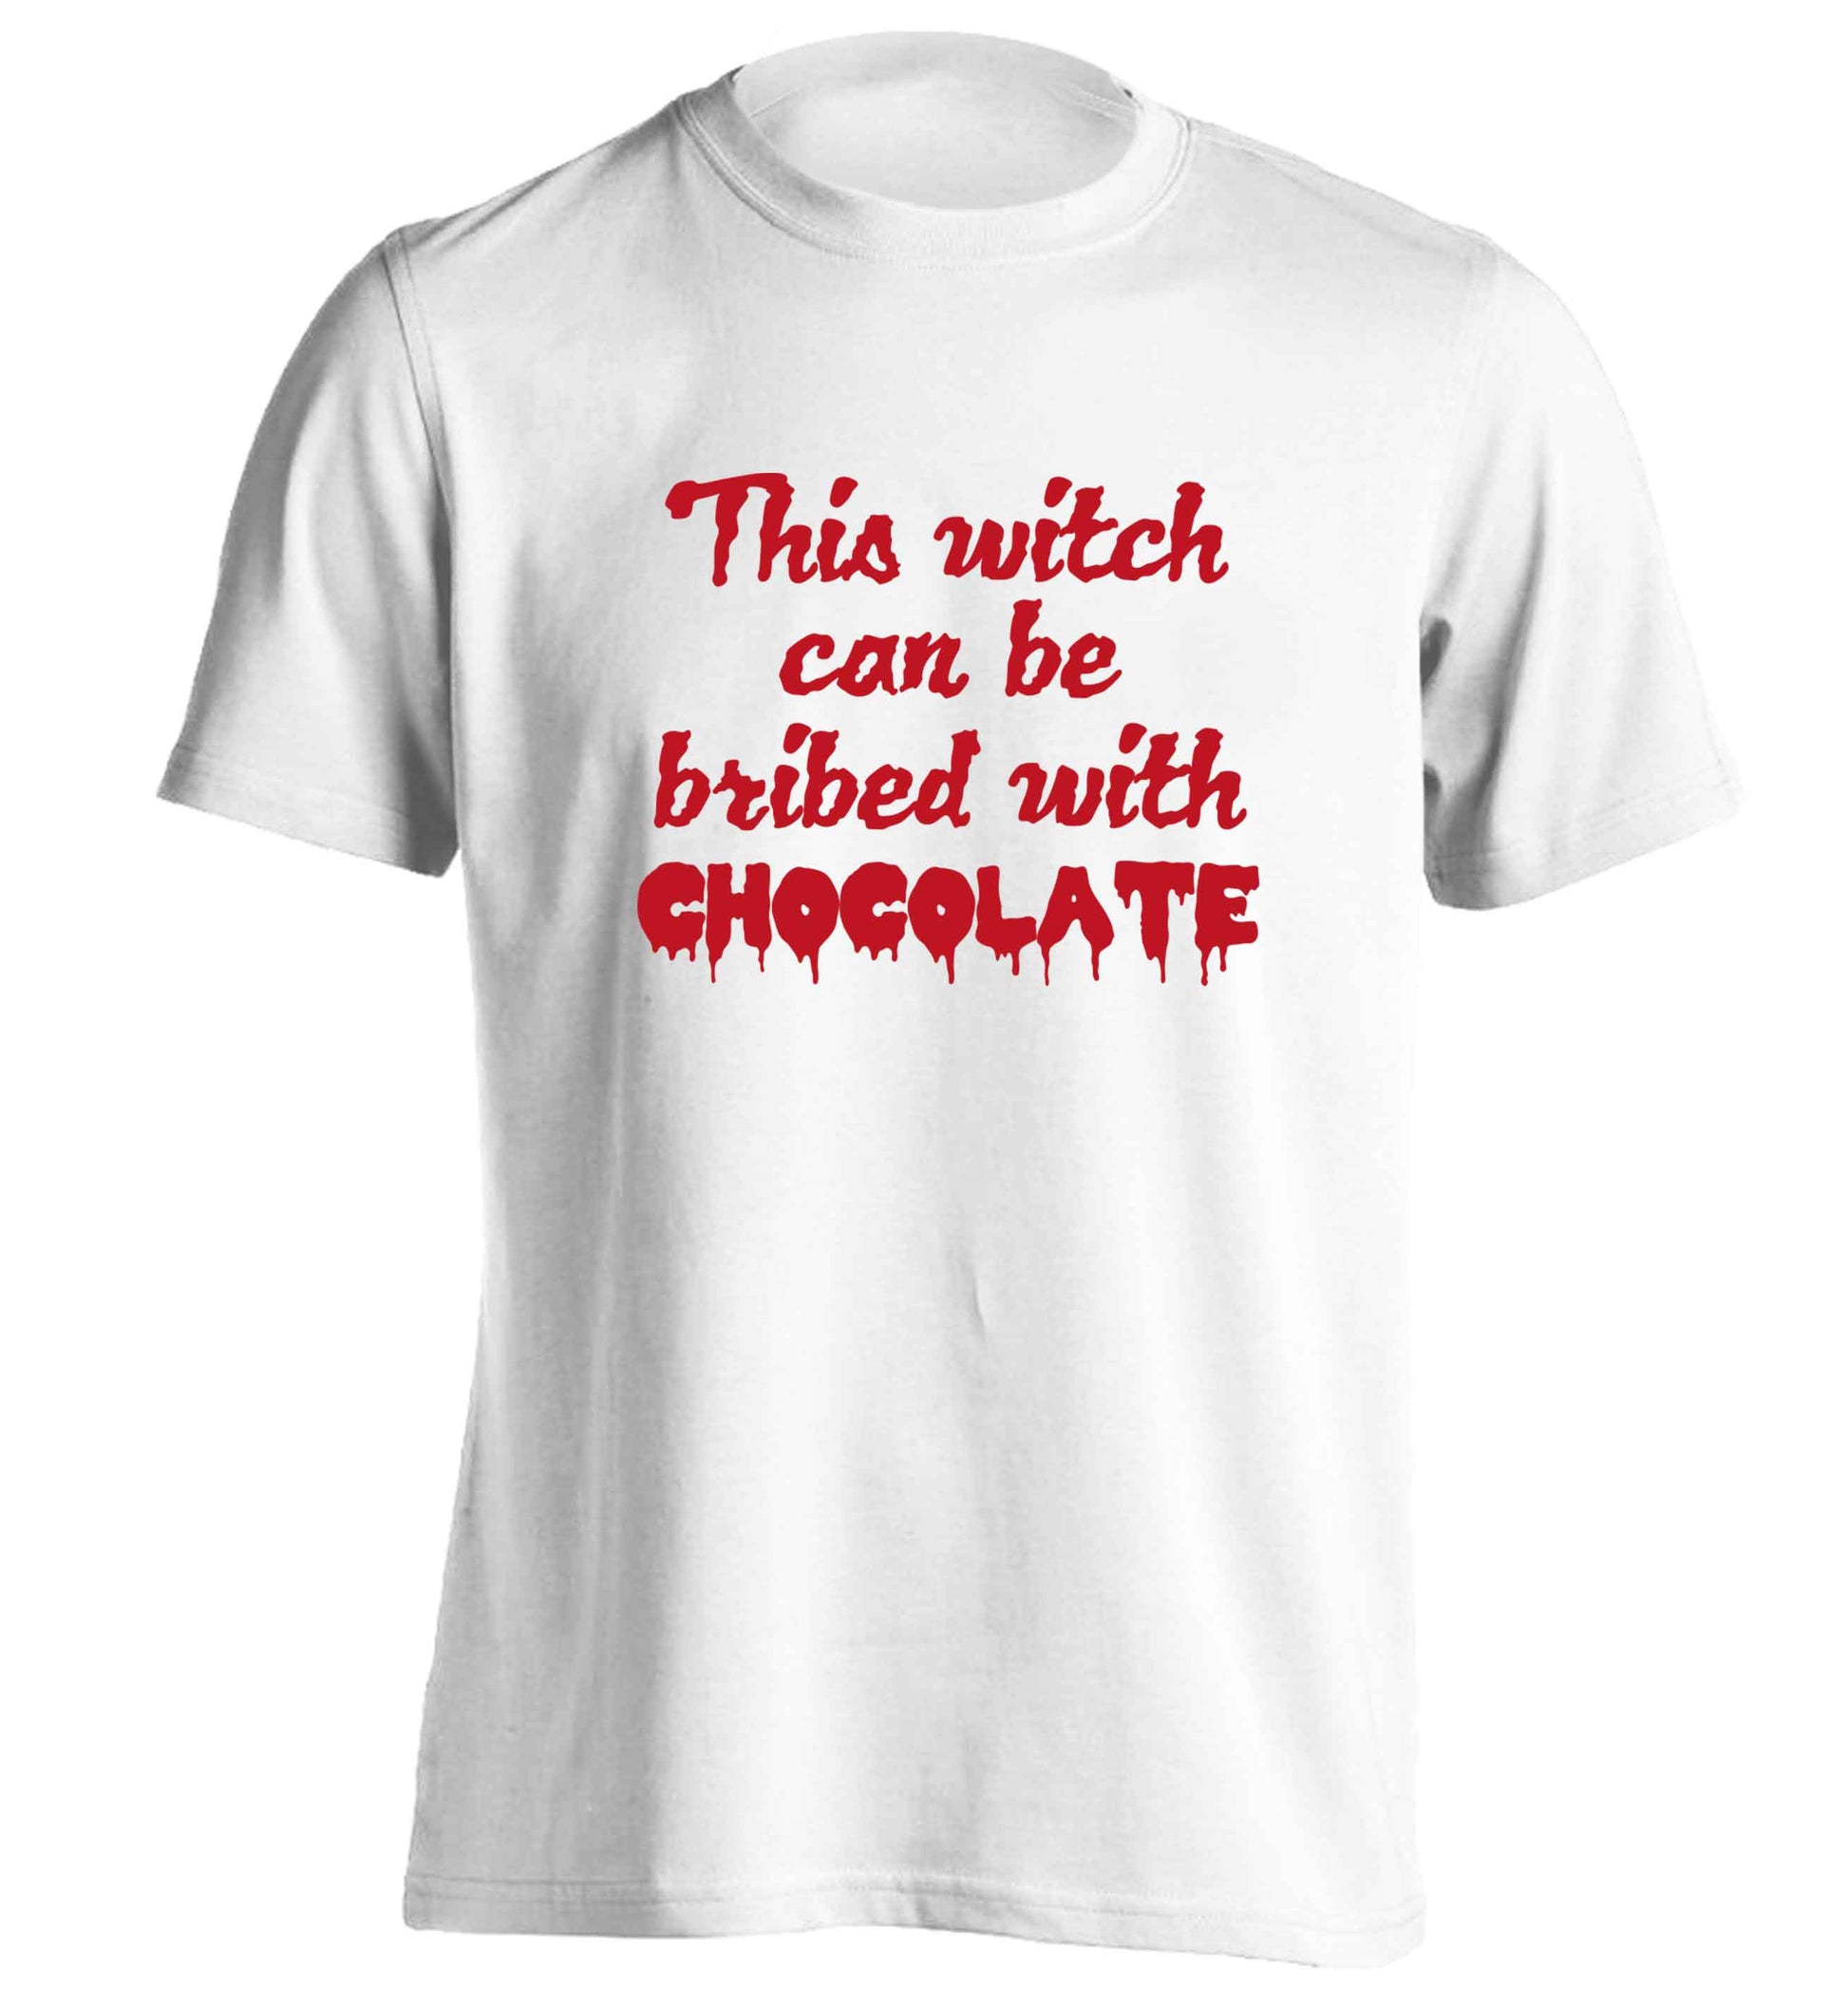 This witch can be bribed with chocolate adults unisex white Tshirt 2XL